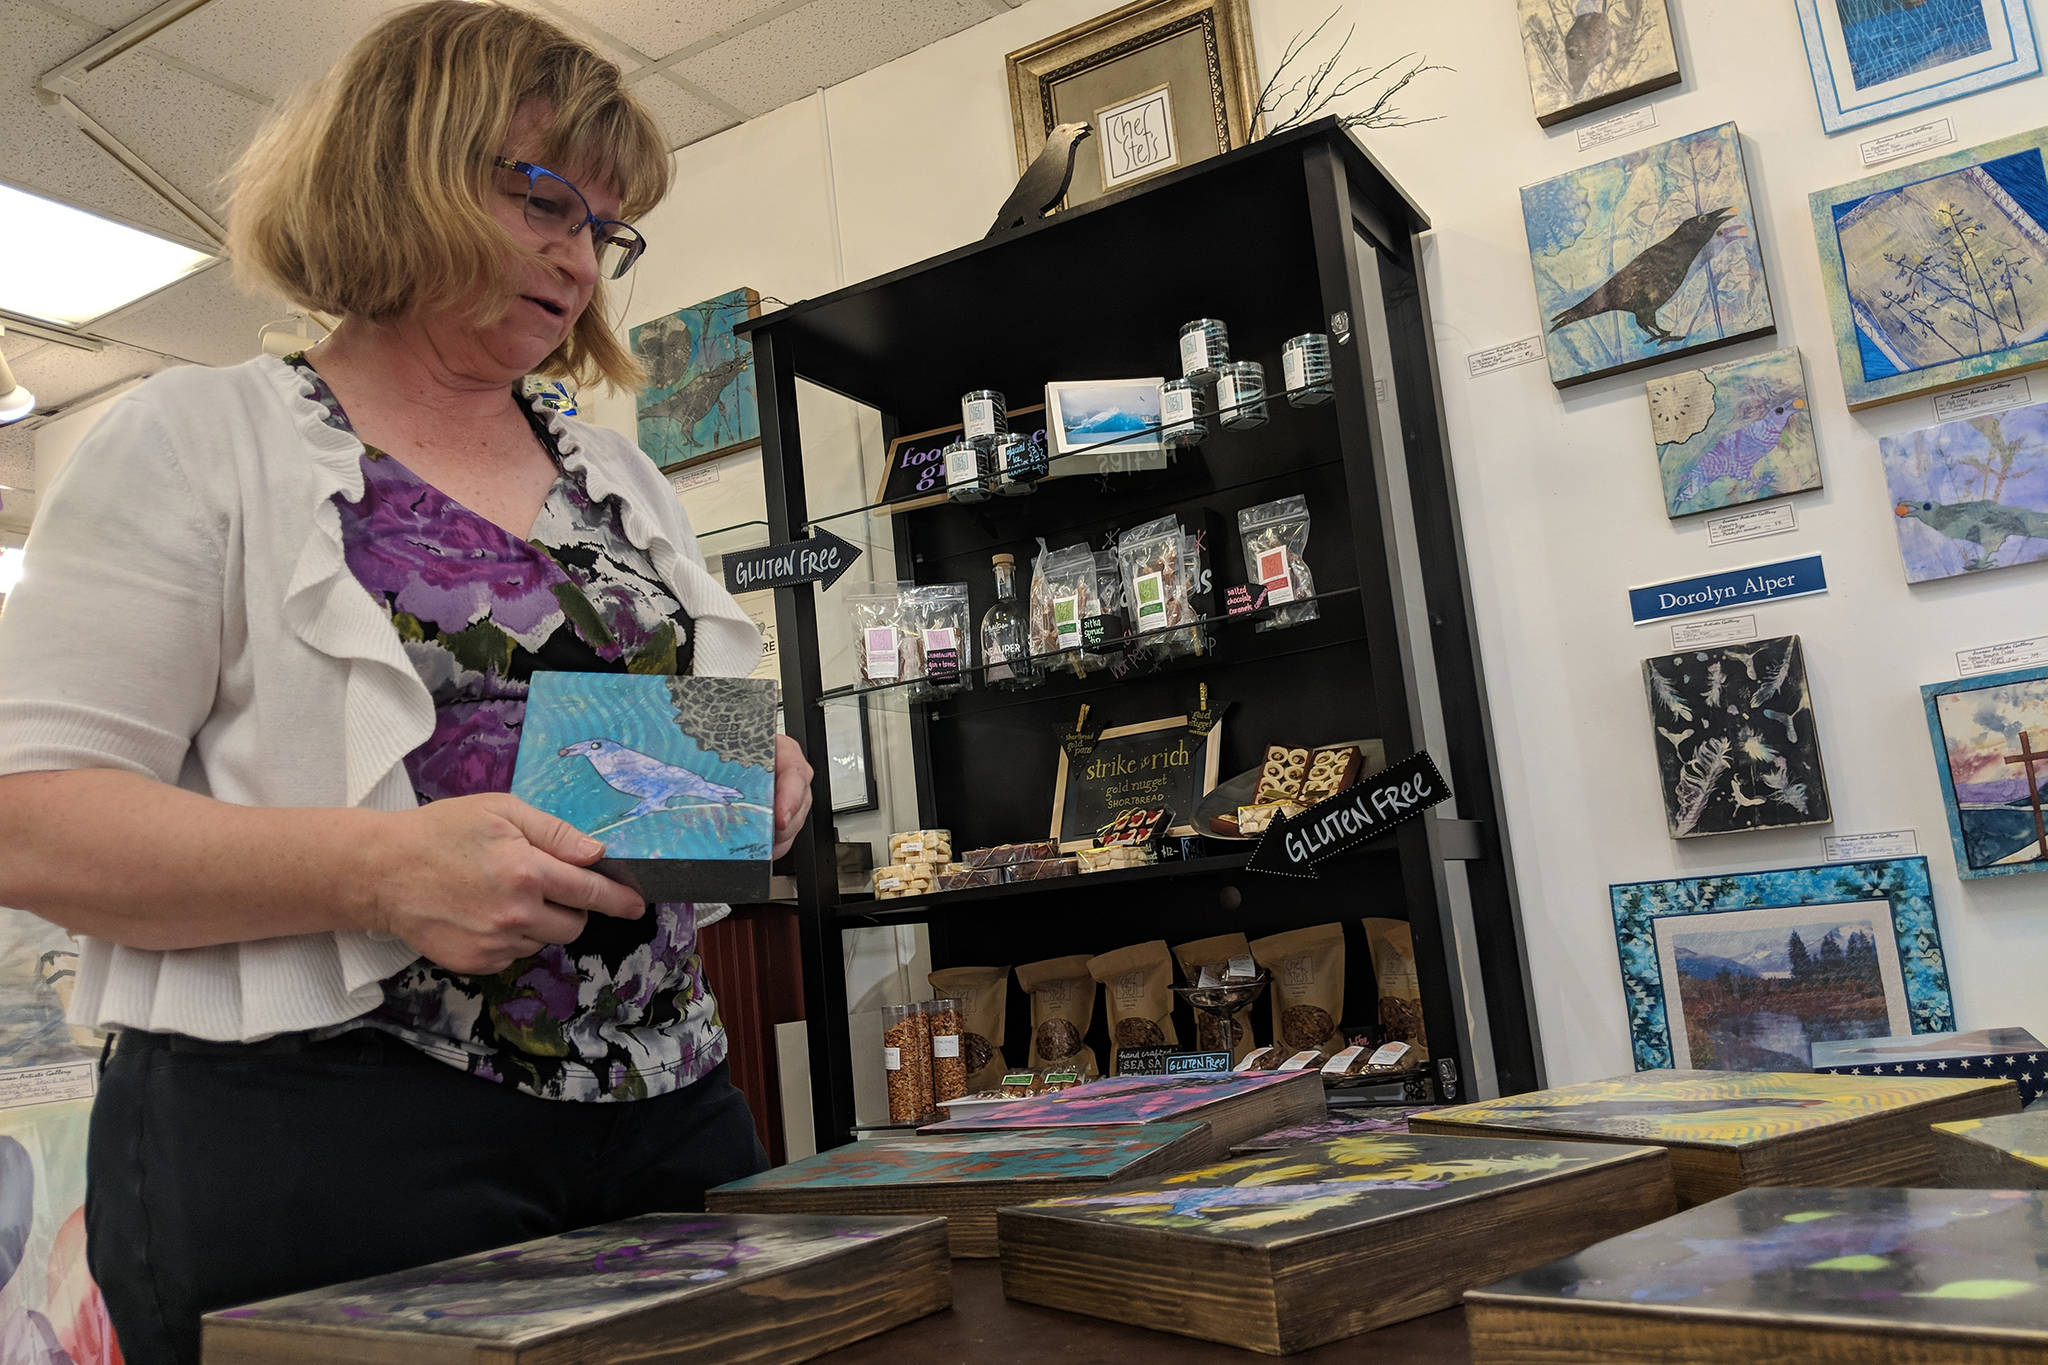 Wax on, blow torch off: Encaustic art up this month at Juneau Artists Gallery